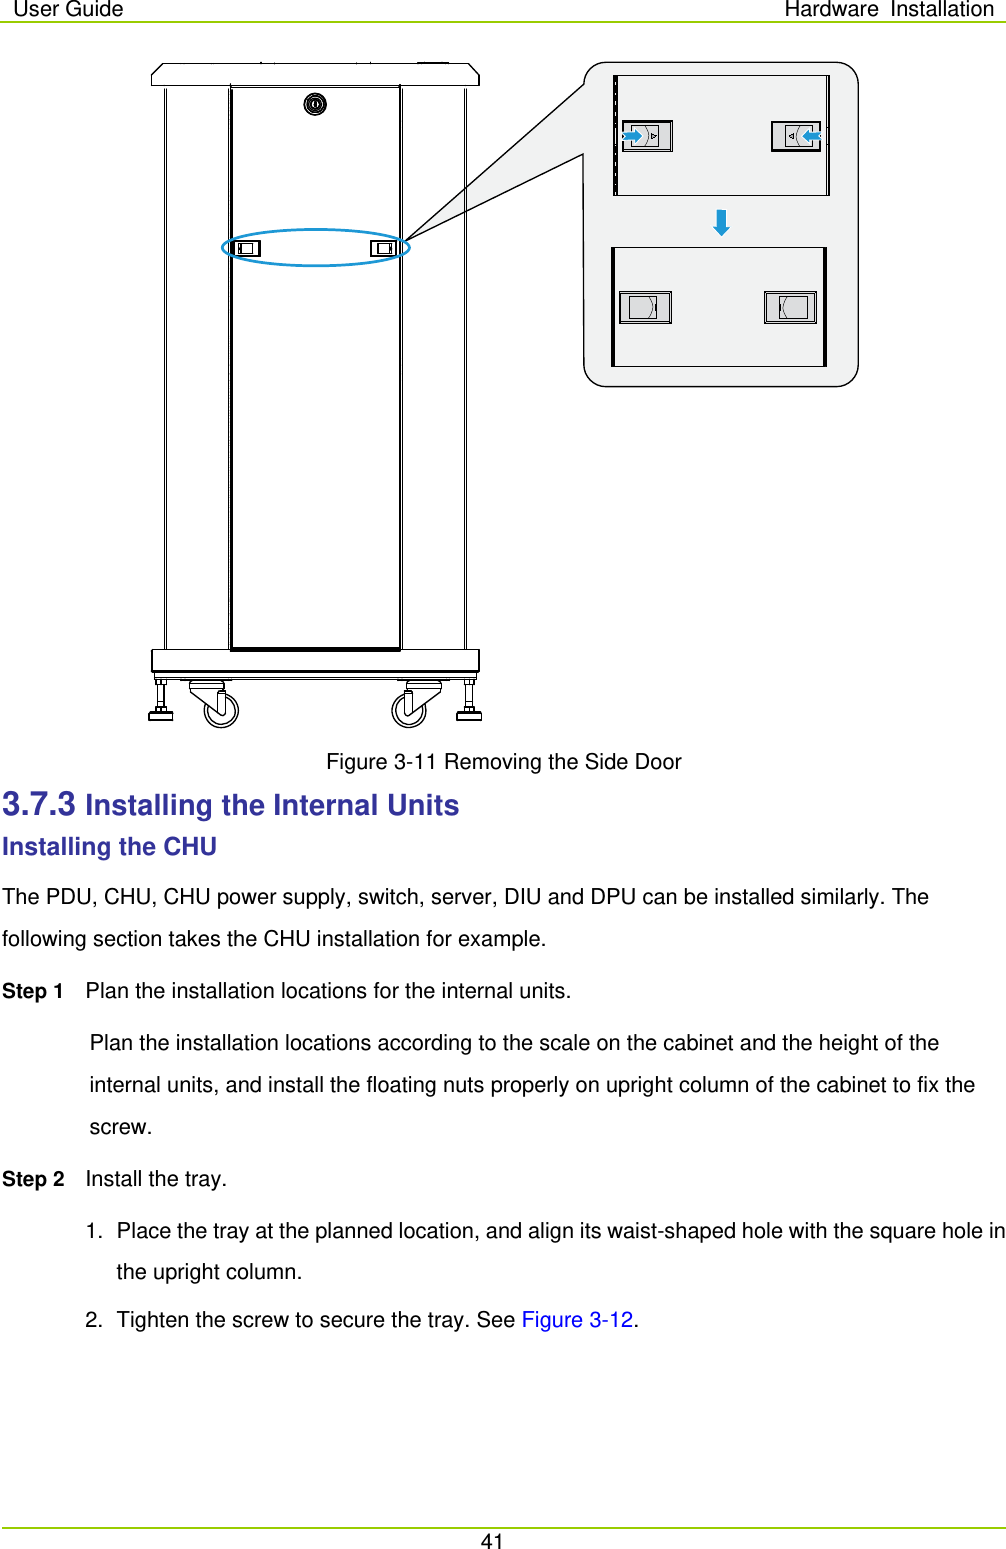 User Guide Hardware Installation  41   Figure 3-11 Removing the Side Door 3.7.3 Installing the Internal Units Installing the CHU The PDU, CHU, CHU power supply, switch, server, DIU and DPU can be installed similarly. The following section takes the CHU installation for example.   Step 1 Plan the installation locations for the internal units. Plan the installation locations according to the scale on the cabinet and the height of the internal units, and install the floating nuts properly on upright column of the cabinet to fix the screw.   Step 2 Install the tray.   1. Place the tray at the planned location, and align its waist-shaped hole with the square hole in the upright column.   2. Tighten the screw to secure the tray. See Figure 3-12. 